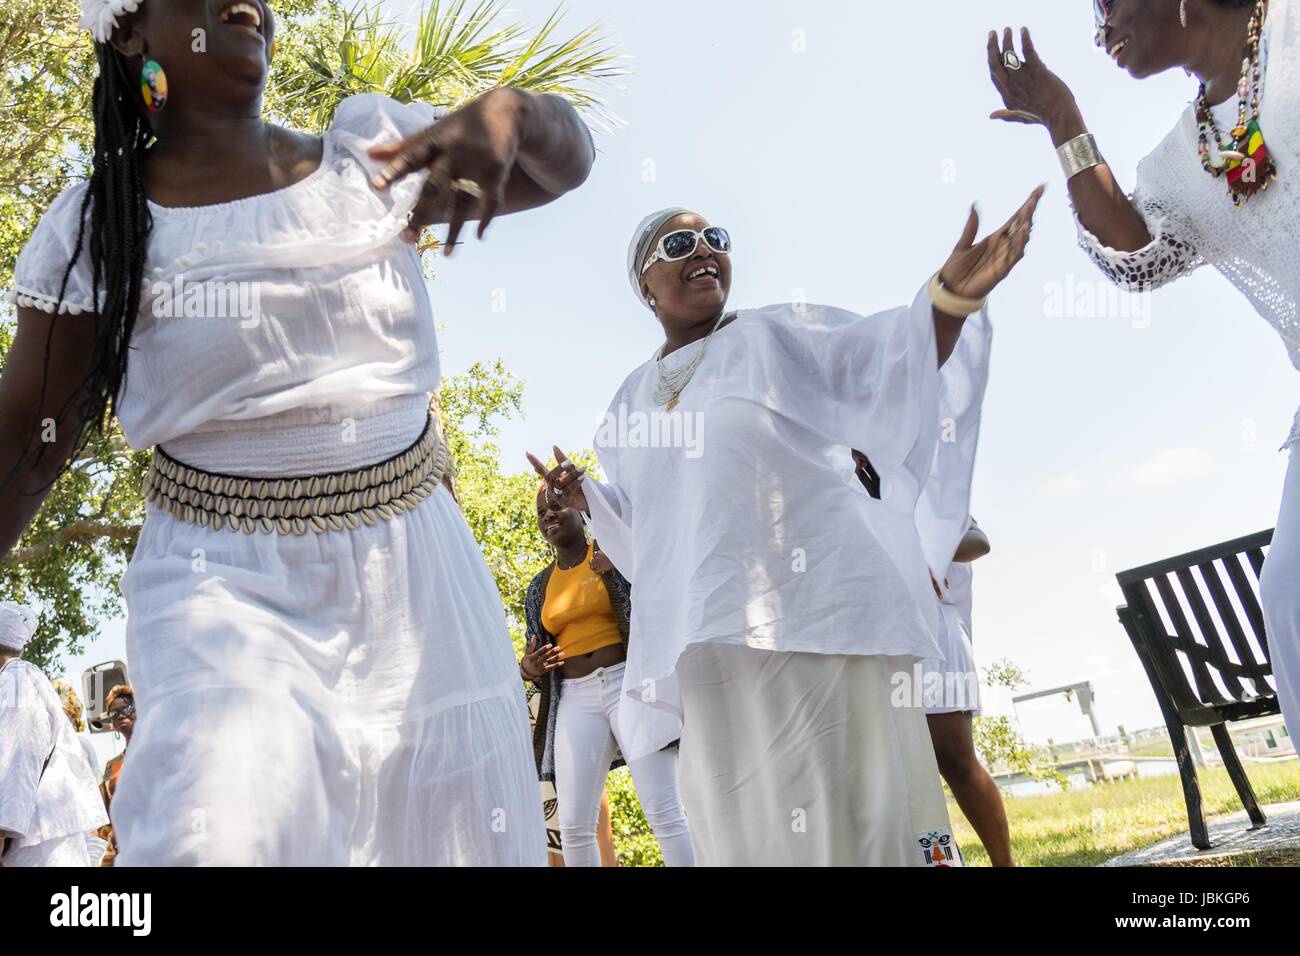 Descendants of enslaved Africans brought to Charleston in the Middle Passage dance to honor their relatives lost during a remembrance ceremony along the saltwater marsh June 10, 2017 in Sullivan's Island, South Carolina. The Middle Passage refers to the triangular trade in which millions of Africans were shipped to the New World as part of the Atlantic slave trade. An estimated 15% of the Africans died at sea and considerably more in the process of capturing and transporting. The total number of African deaths directly attributable to the Middle Passage voyage is estimated at up to two million Stock Photo